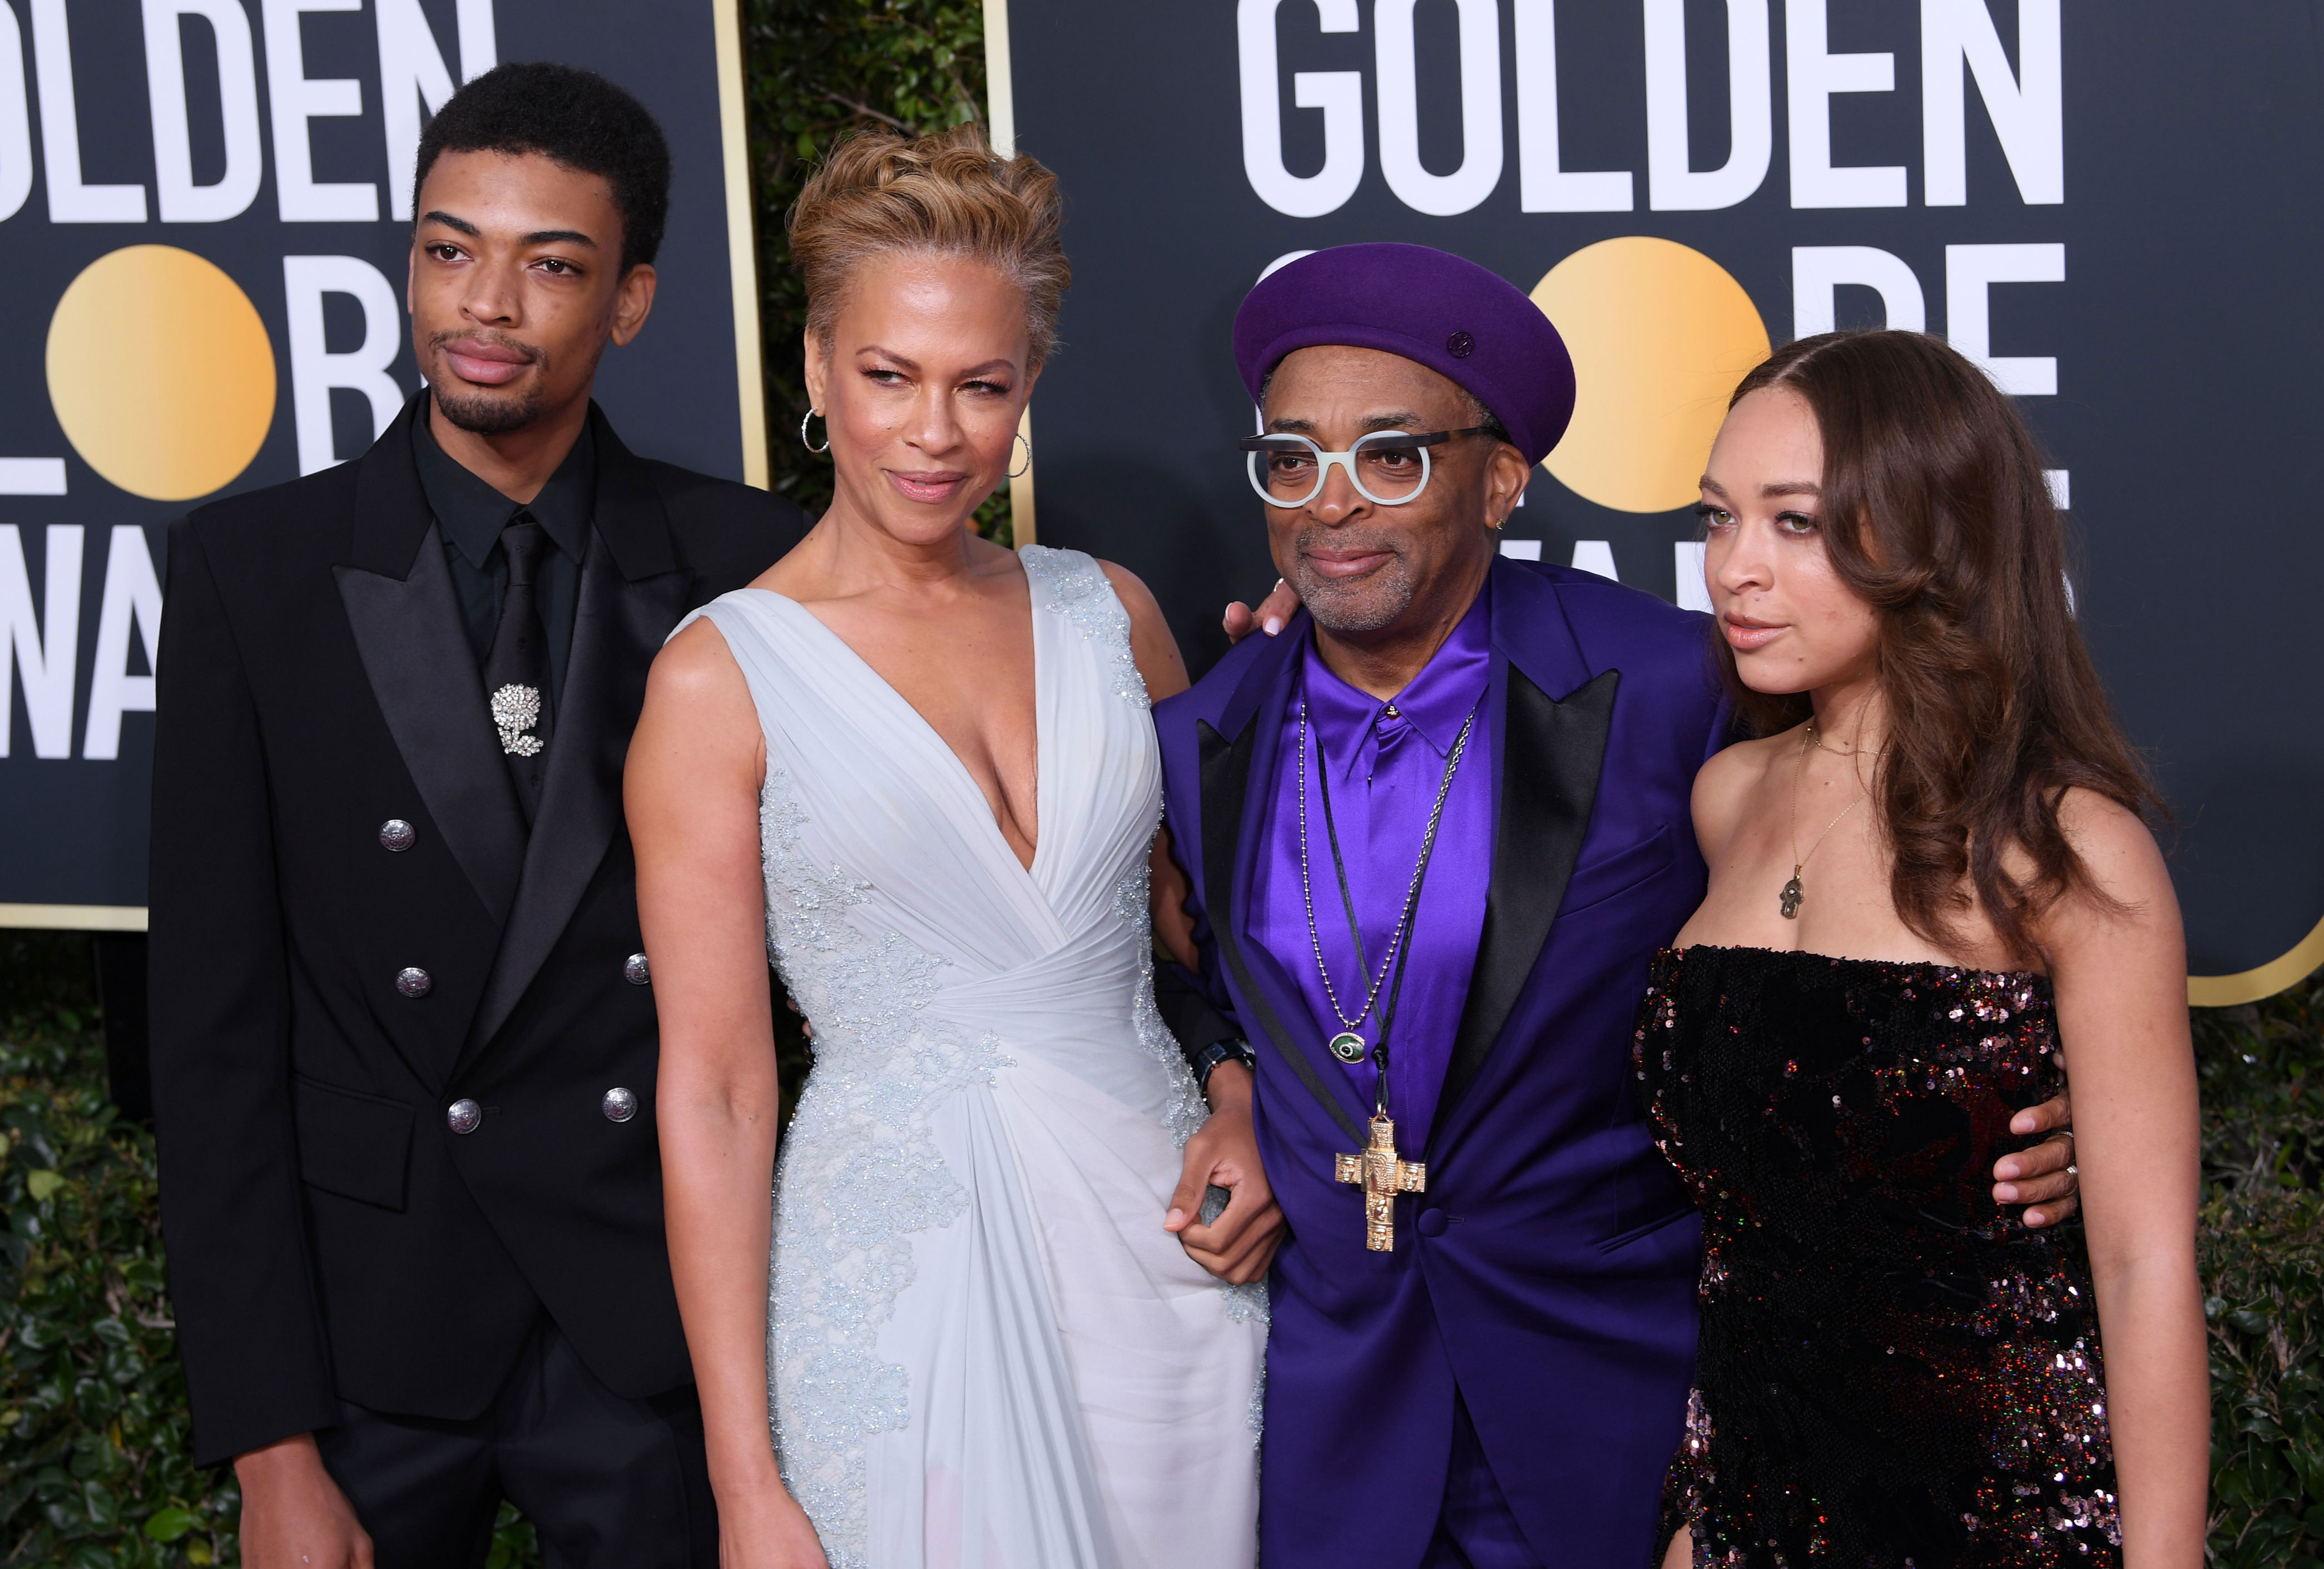 <p>Filmmaker <span>Spike Lee and his wife, attorney-turned-producer Tonya Lewis Lee, posed on the red carpet at the </span><a href="https://www.wonderwall.com/awards-events/red-carpet/2019-golden-globes-see-all-stars-red-carpet-3017905.gallery">2019 Golden Globe Awards</a><span> with their kids, daughter Satchel Lee (born in 1994) and son Jackson Lee (who was born in 1997). Two years later, their children were chosen to be Golden Globe ambassadors. Not only were they the first Black siblings named to the position (which was in earlier years known as Mr. or Miss Golden Globe), but Jackson was </span><a href="https://www.wonderwall.com/celebrity/black-stars-who-made-history-36404.gallery">the first Black male ambassador in Golden Globes history</a><span>.</span></p>